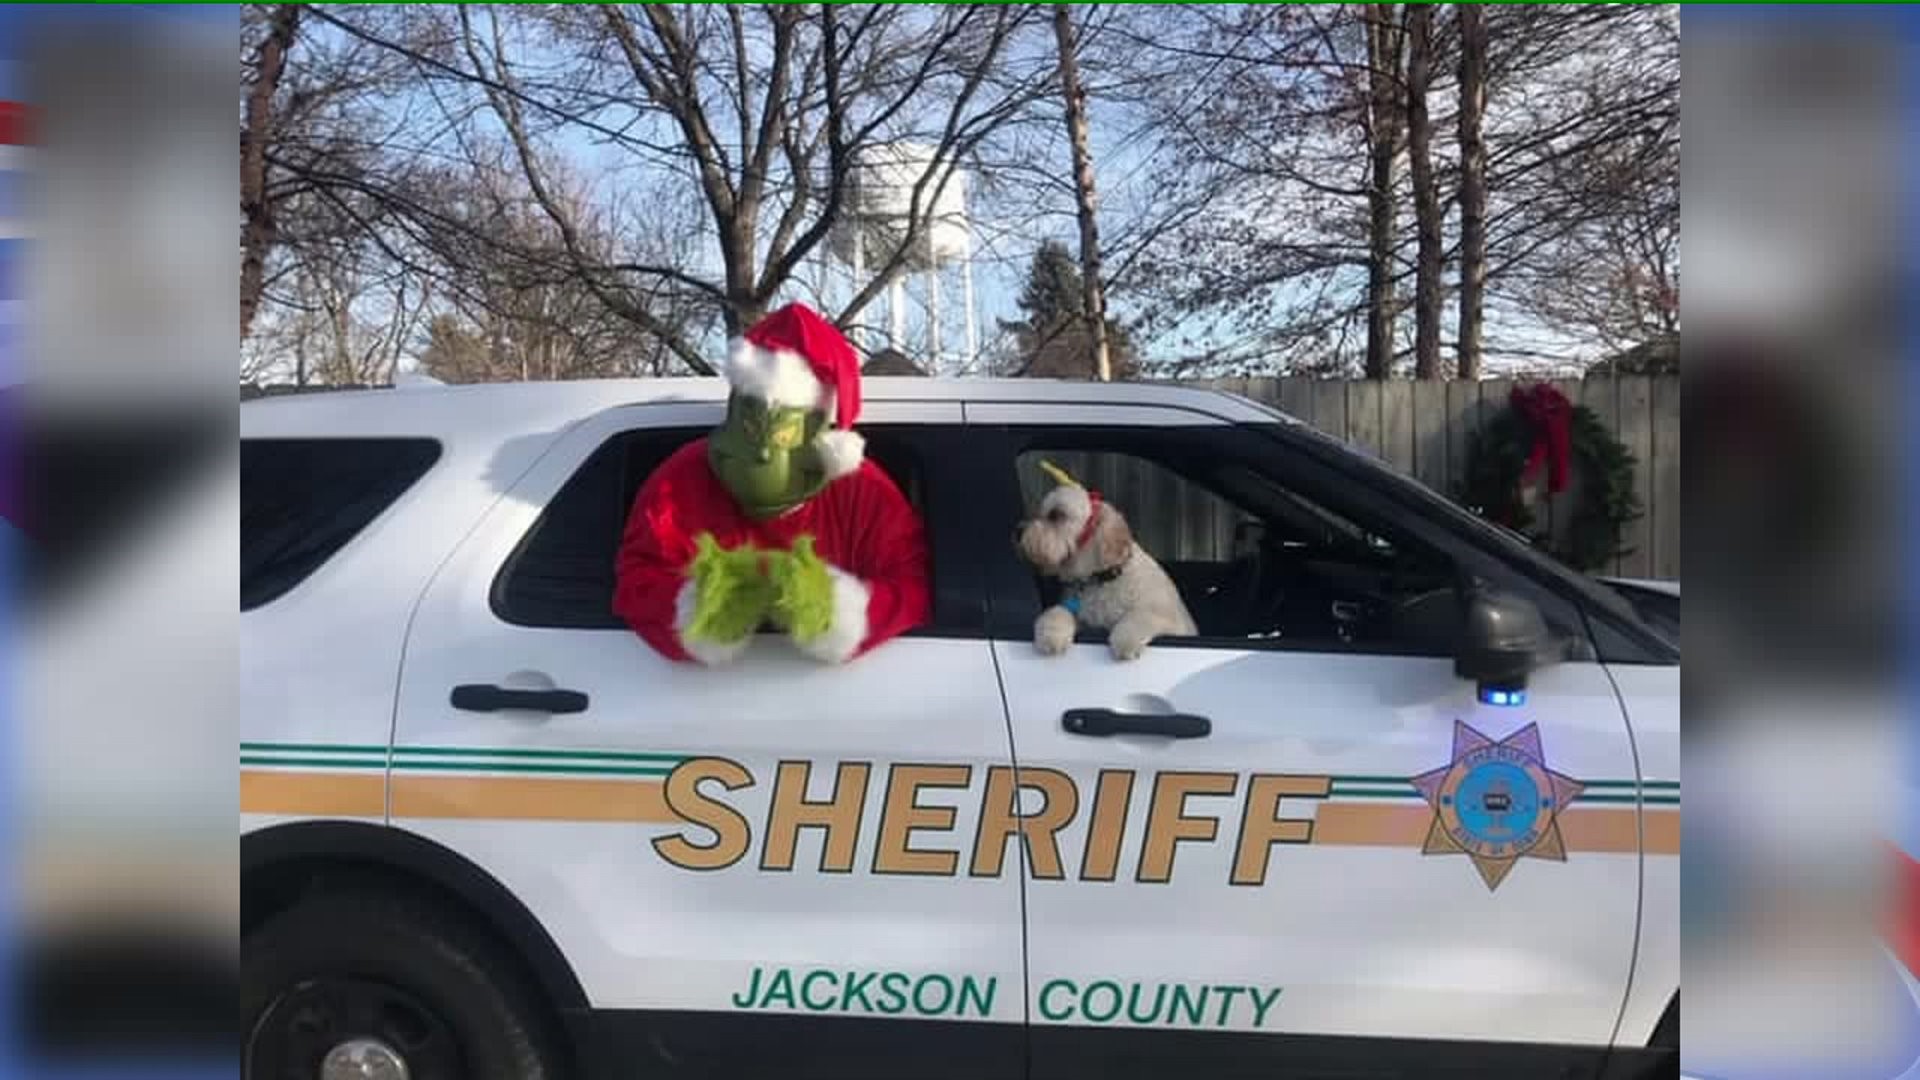 Grinch gets arrested in Jackson County, Iowa